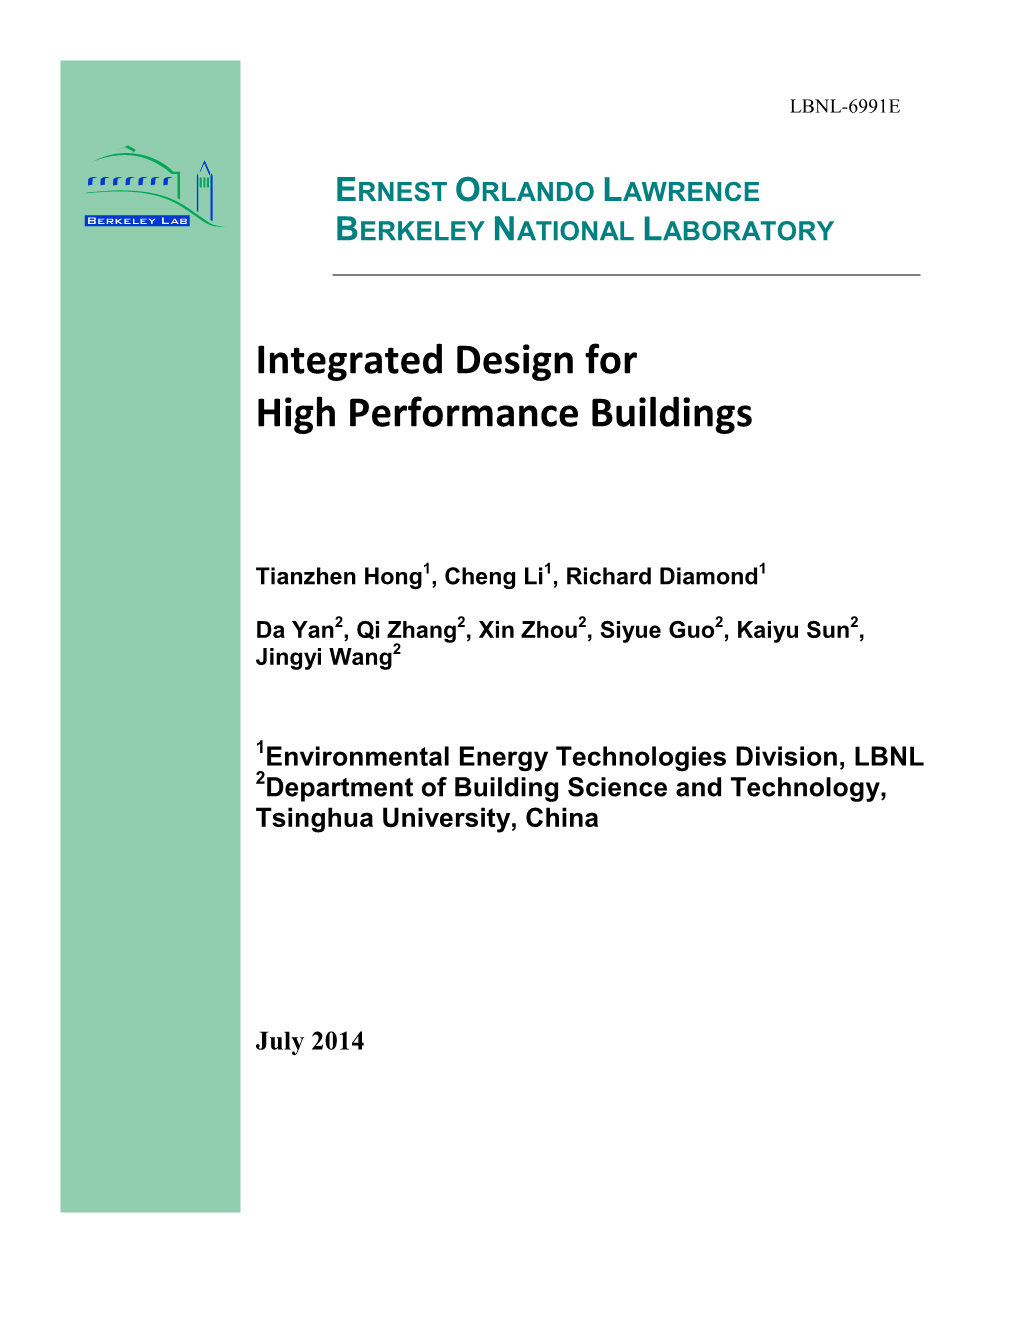 Integrated Design for High Performance Buildings